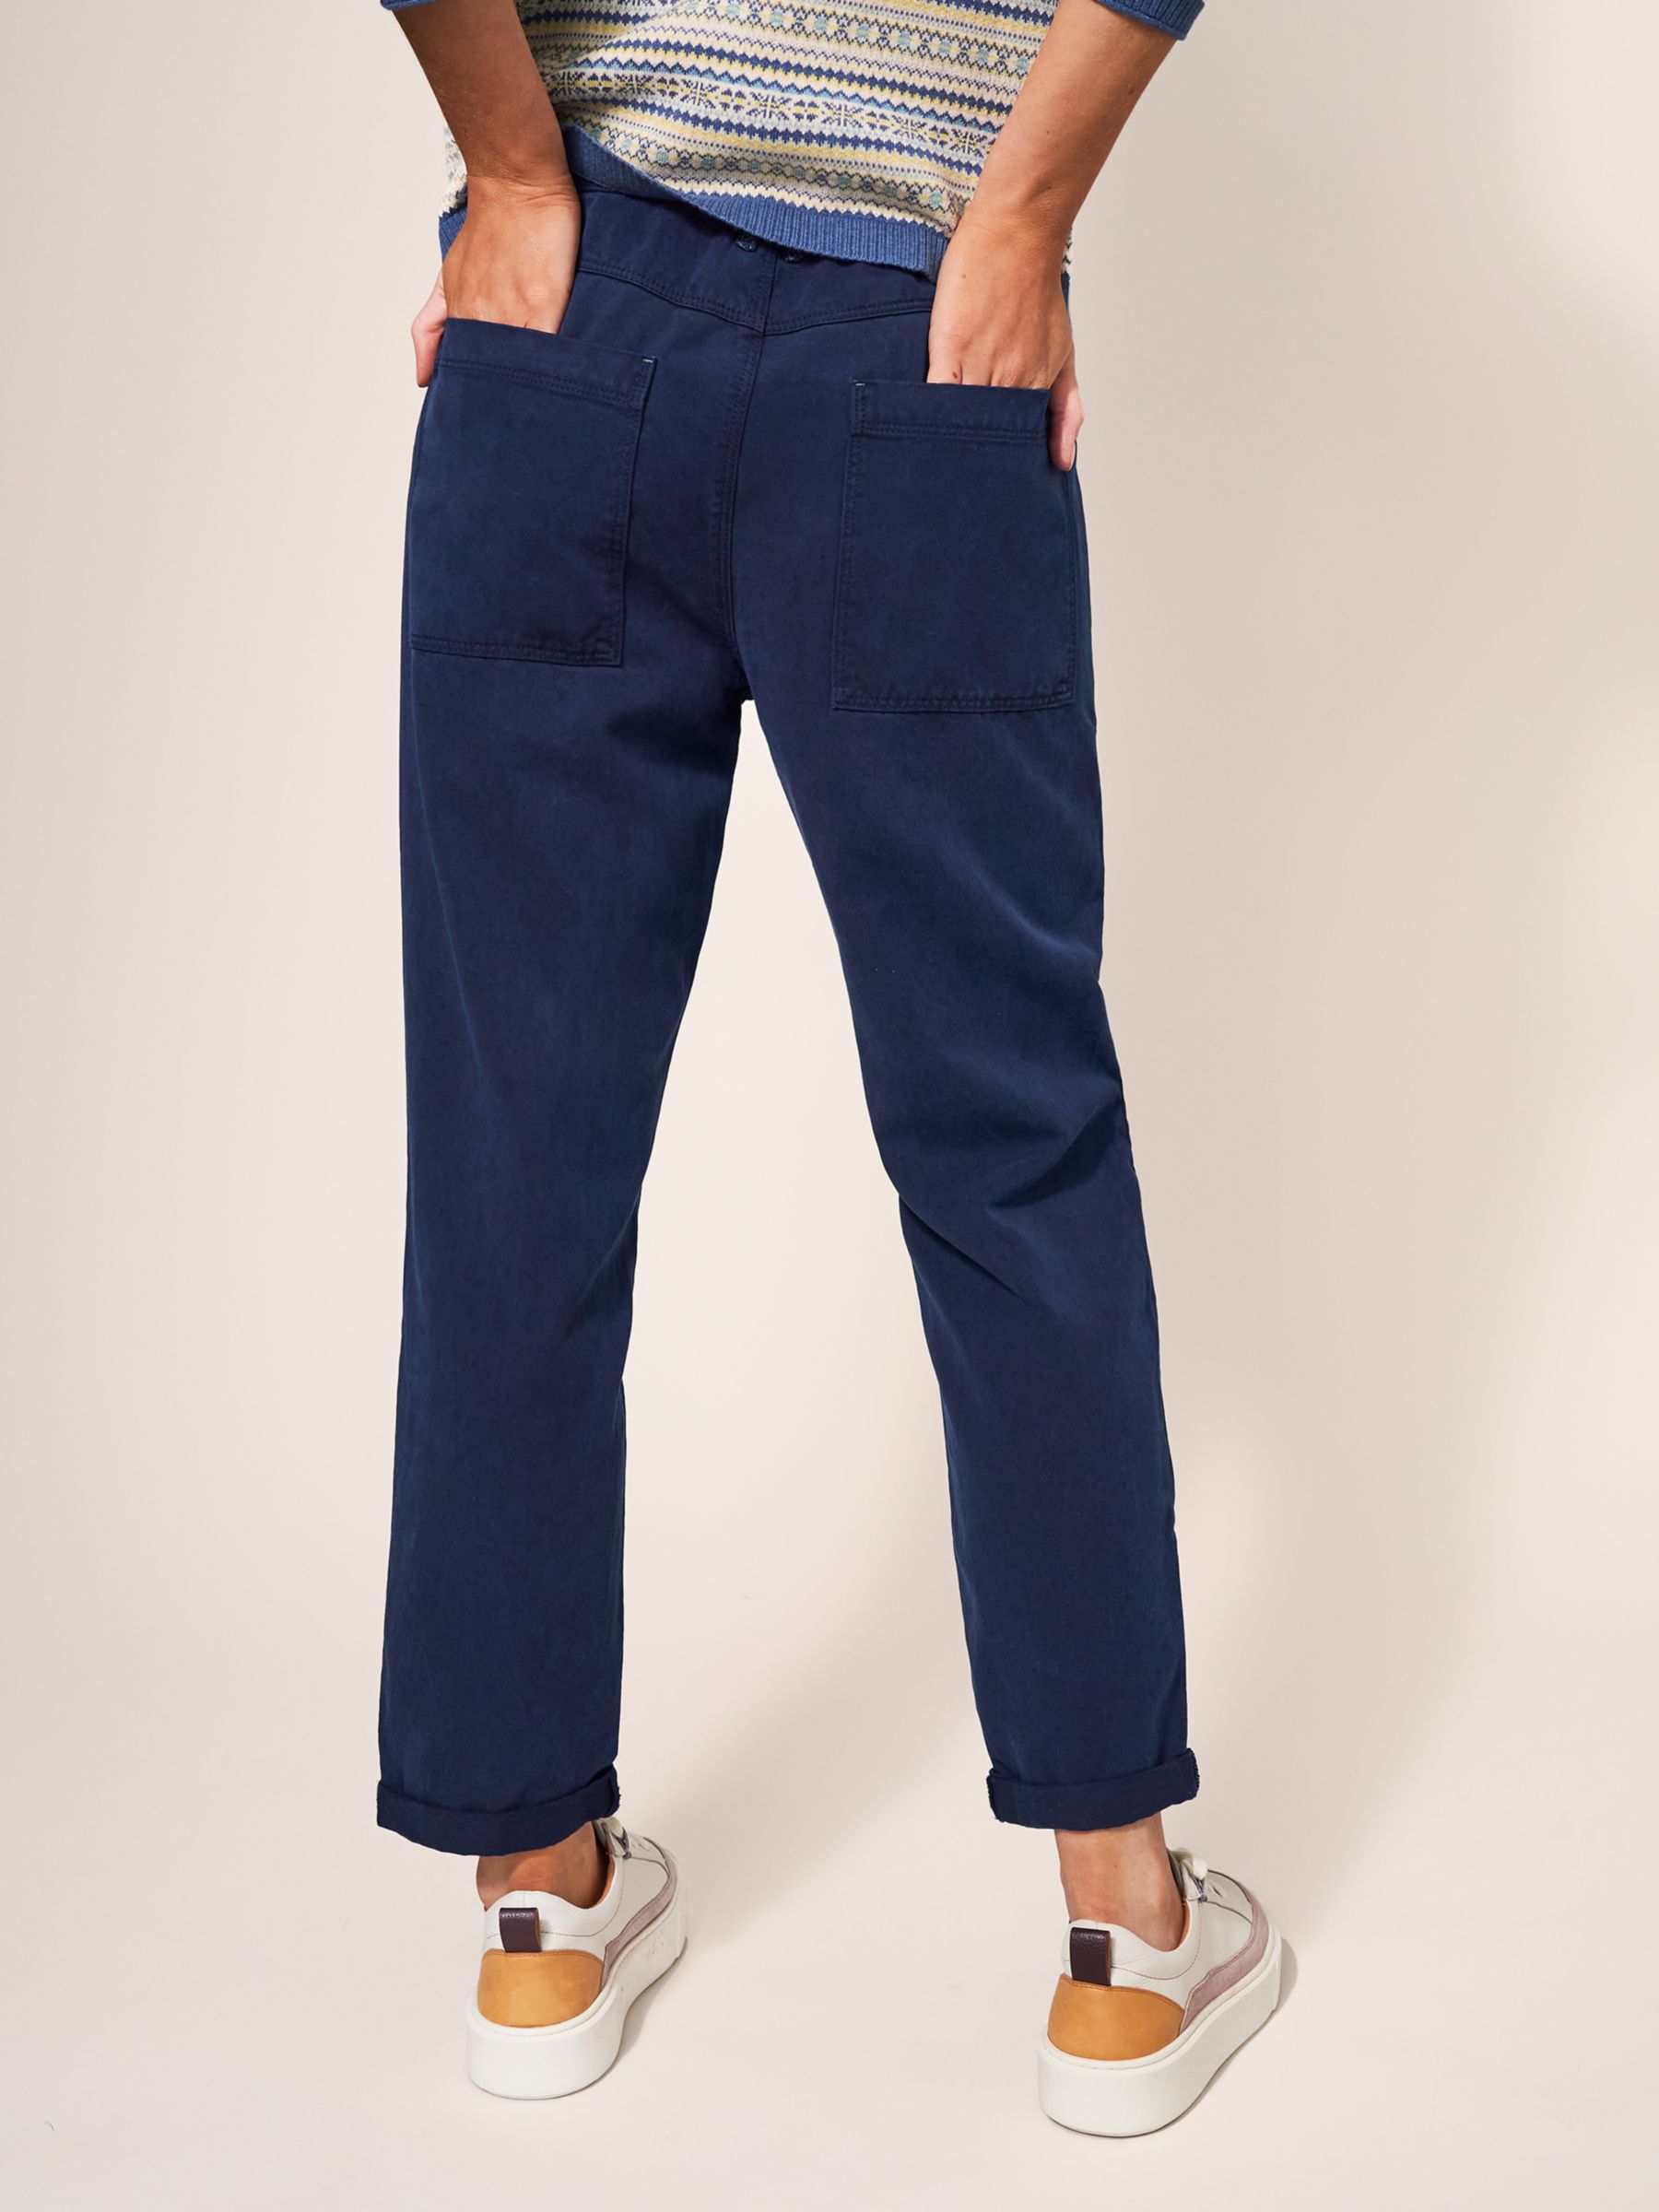 Buy White Stuff Thea Cotton Blend Chinos Online at johnlewis.com